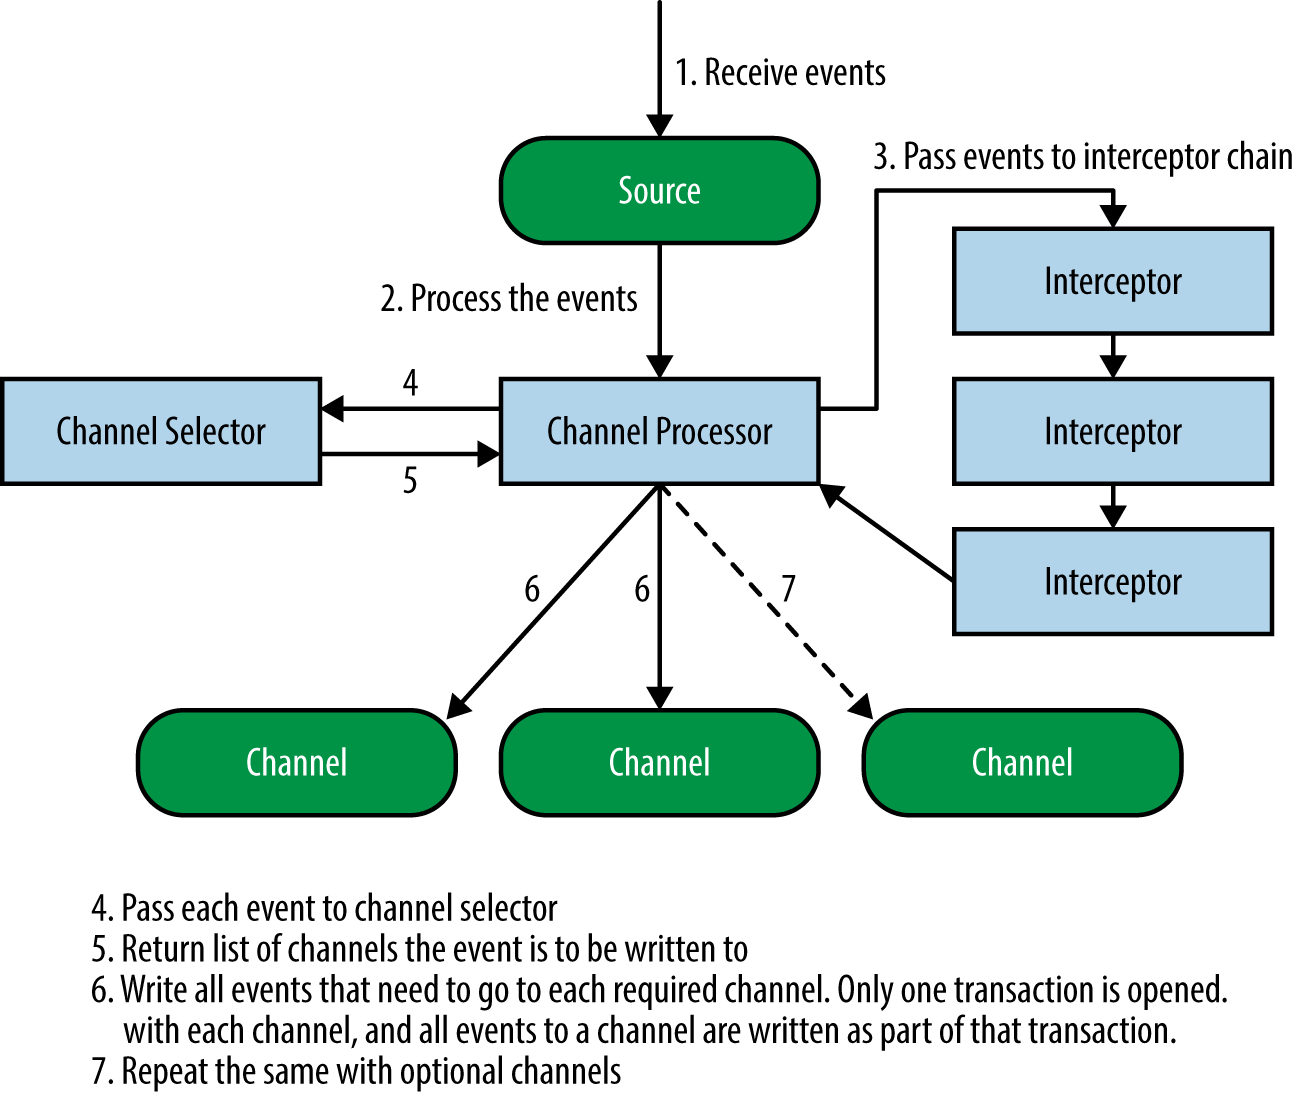 Interaction between sources, channel processors, interceptors, and channel selectors